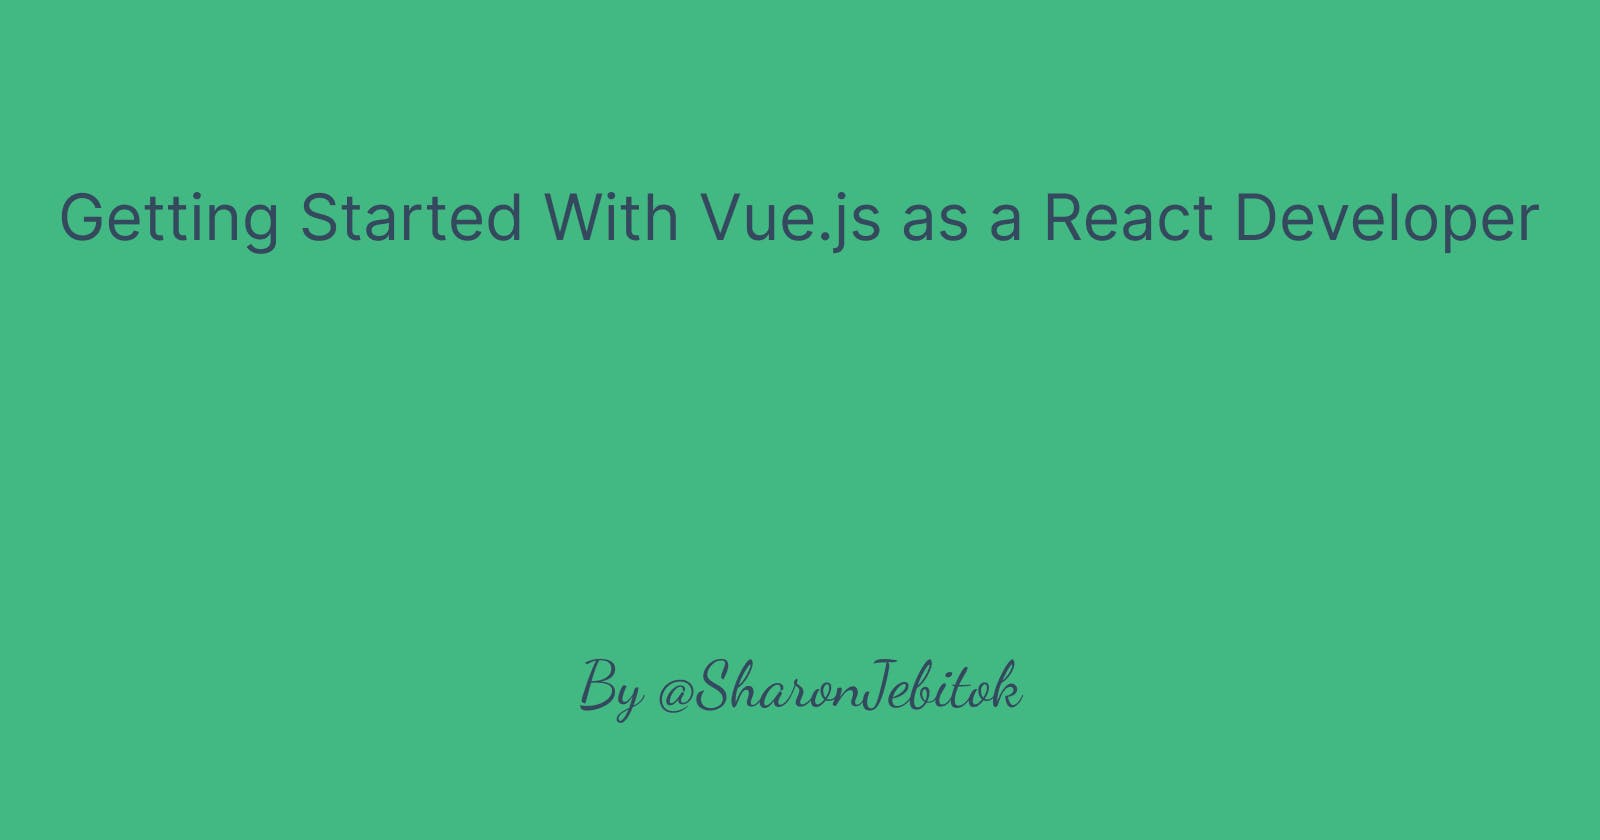 Getting started with Vue.js